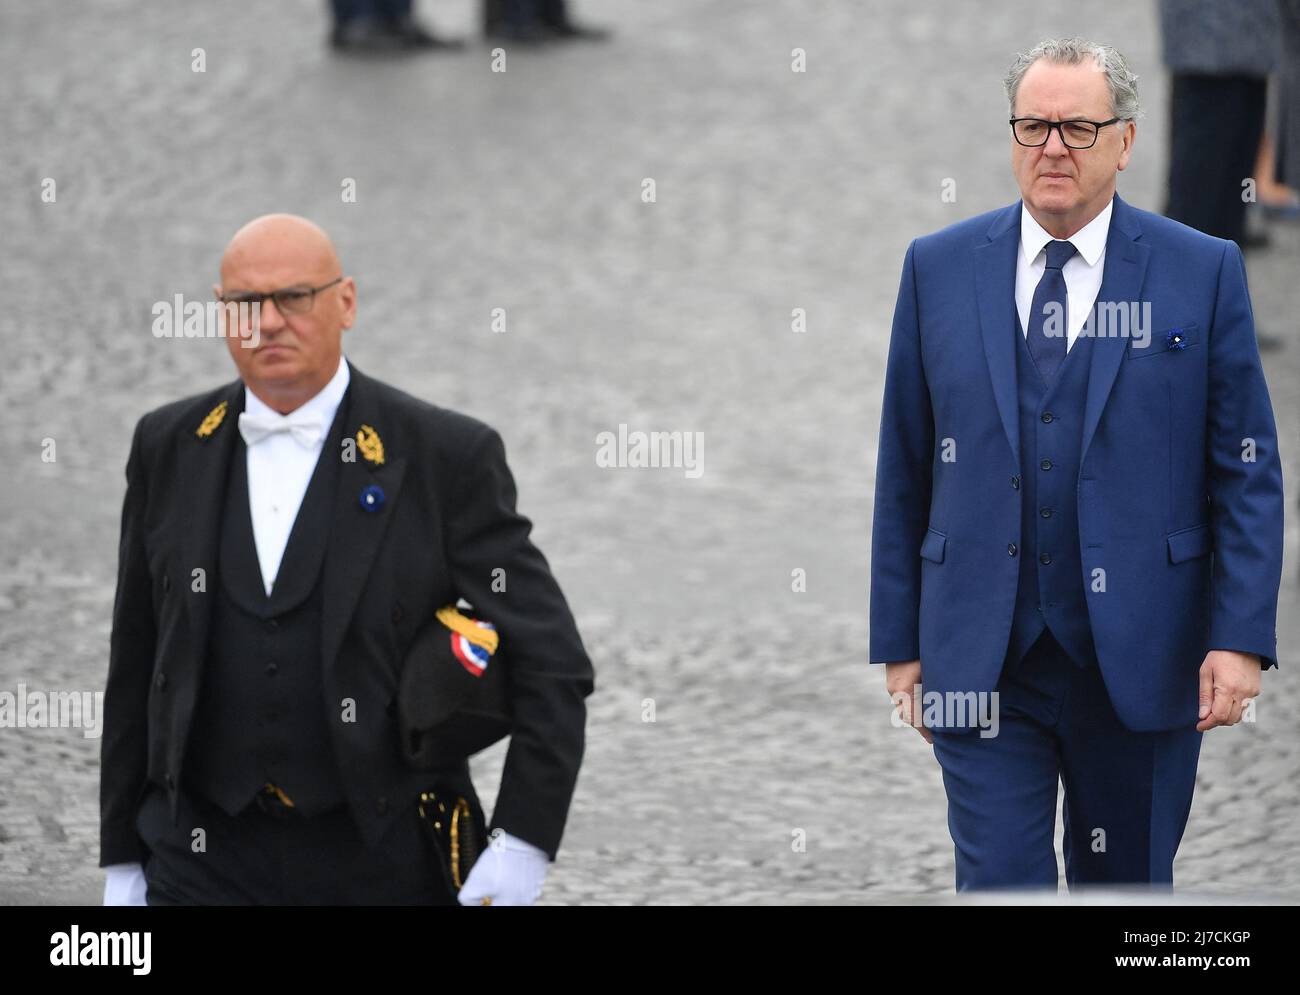 Paris, France, May 8, 2022, President of the French National Assembly Richard Ferrand attends, at the Arc de Triomphe, the ceremony marking the Allied victory against Nazi Germany and the end of World War II in Europe (VE Day), in Paris on May 8, 2022photo by Christian Liewig/ABACAPRESS.COM Stock Photo